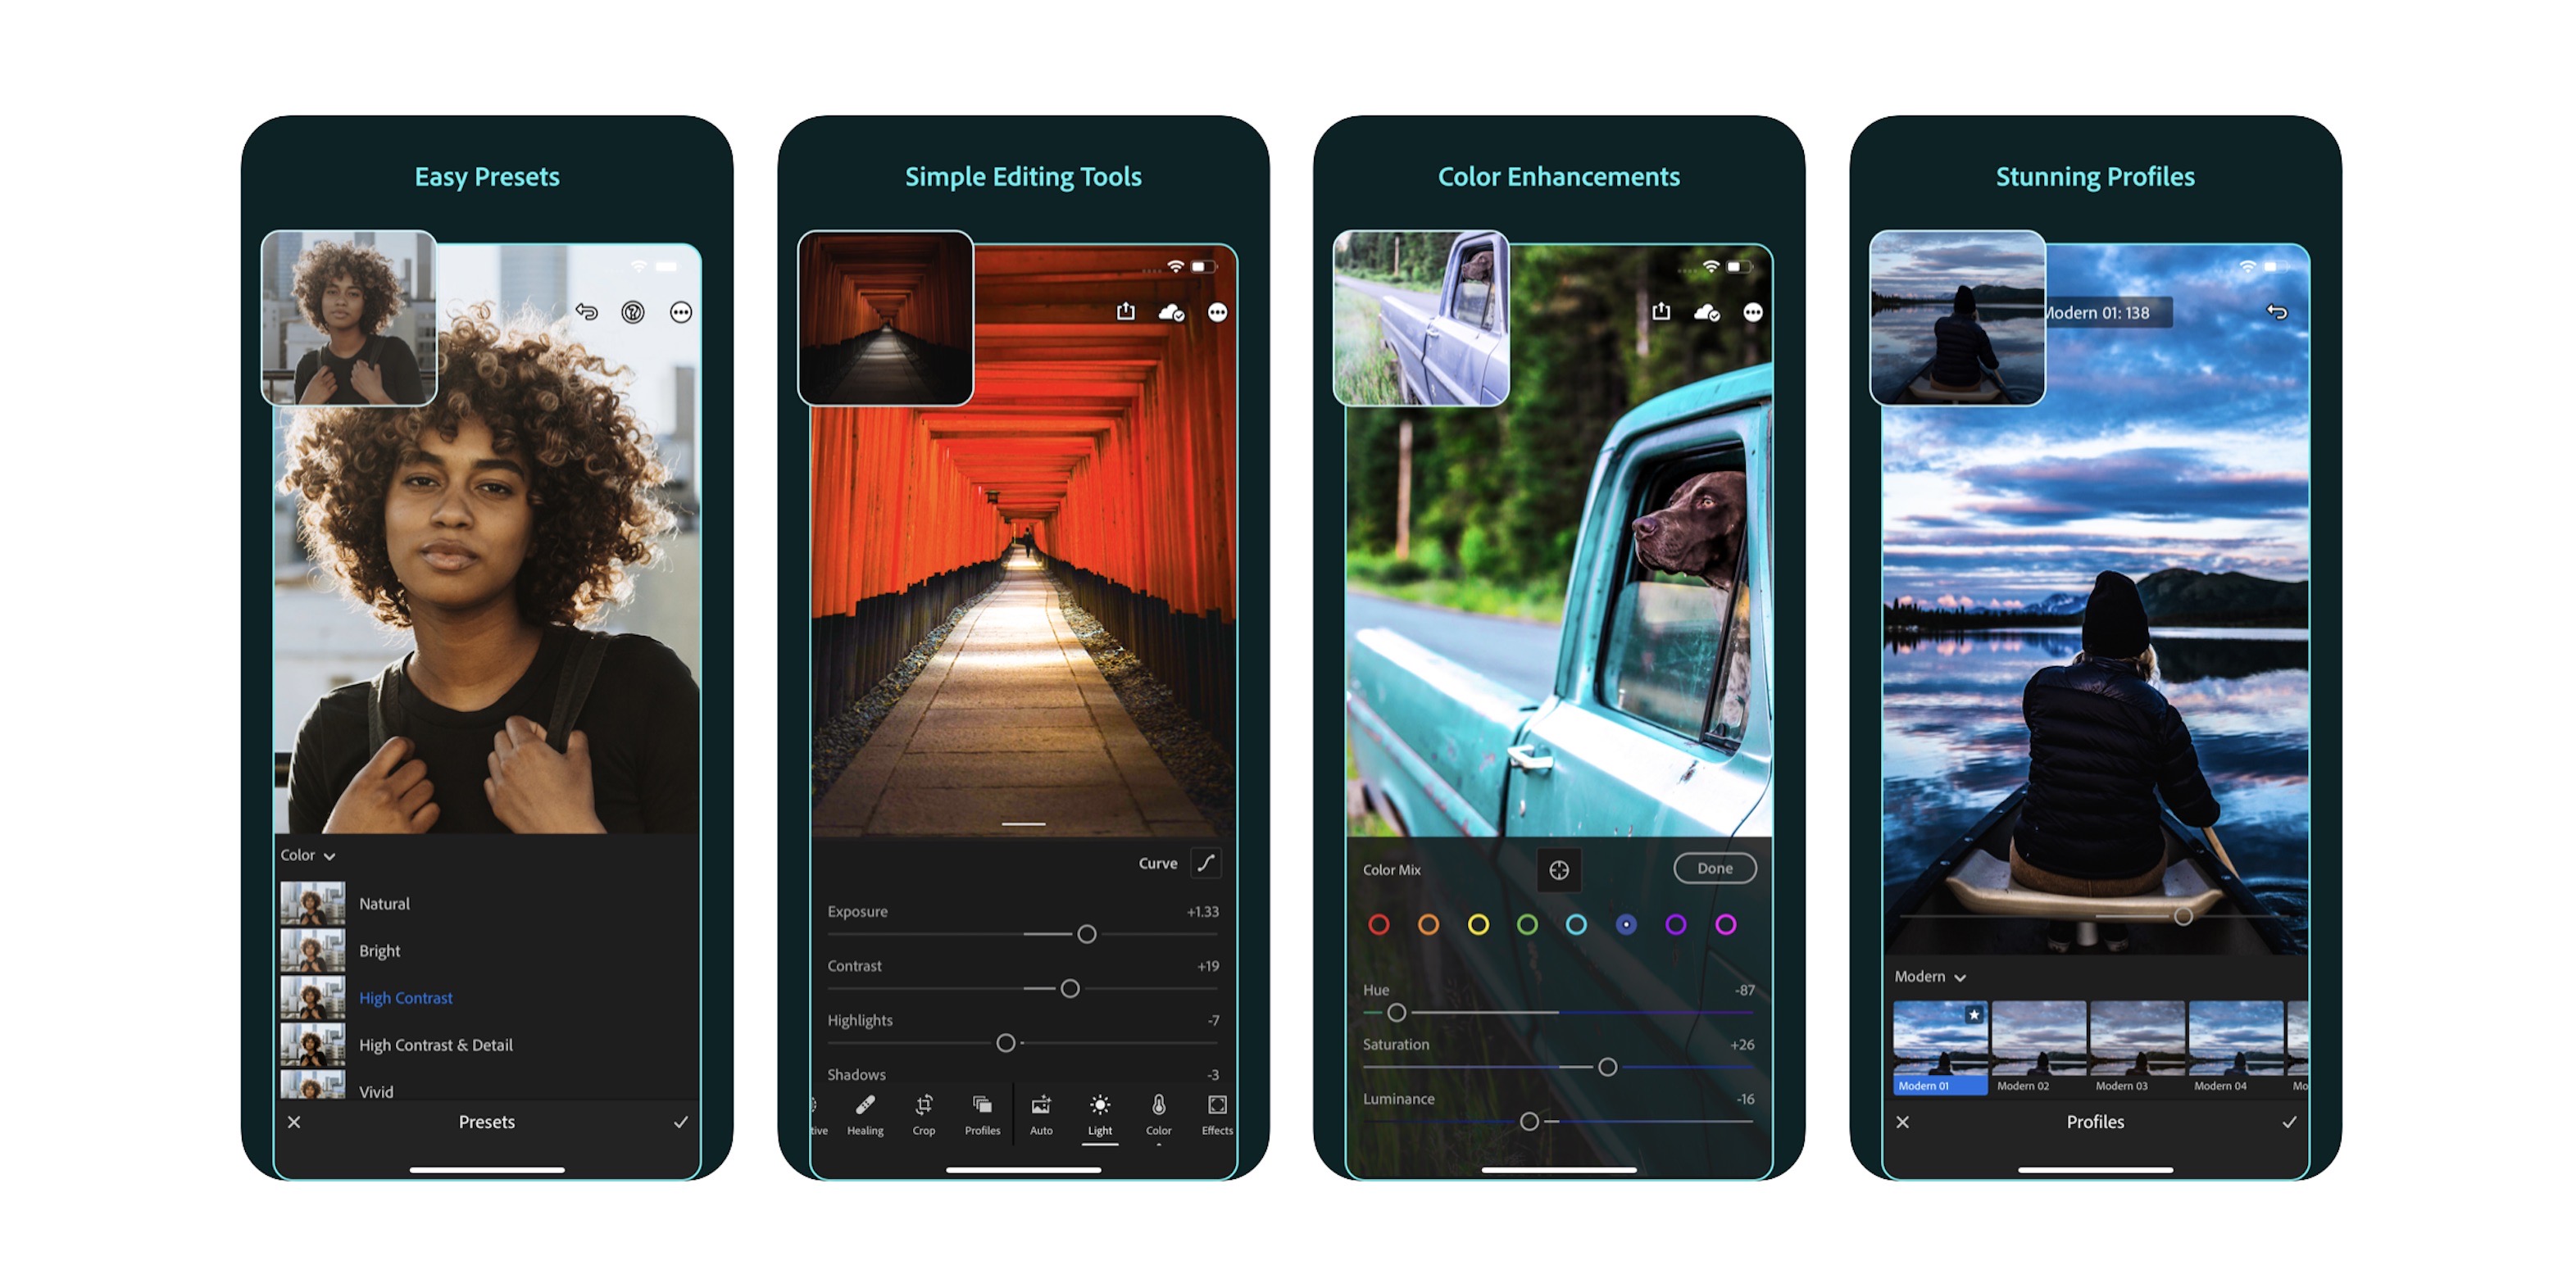 adobe confirms lightroom ios photos erased due to update bug are 'not recoverable' - 9to5mac